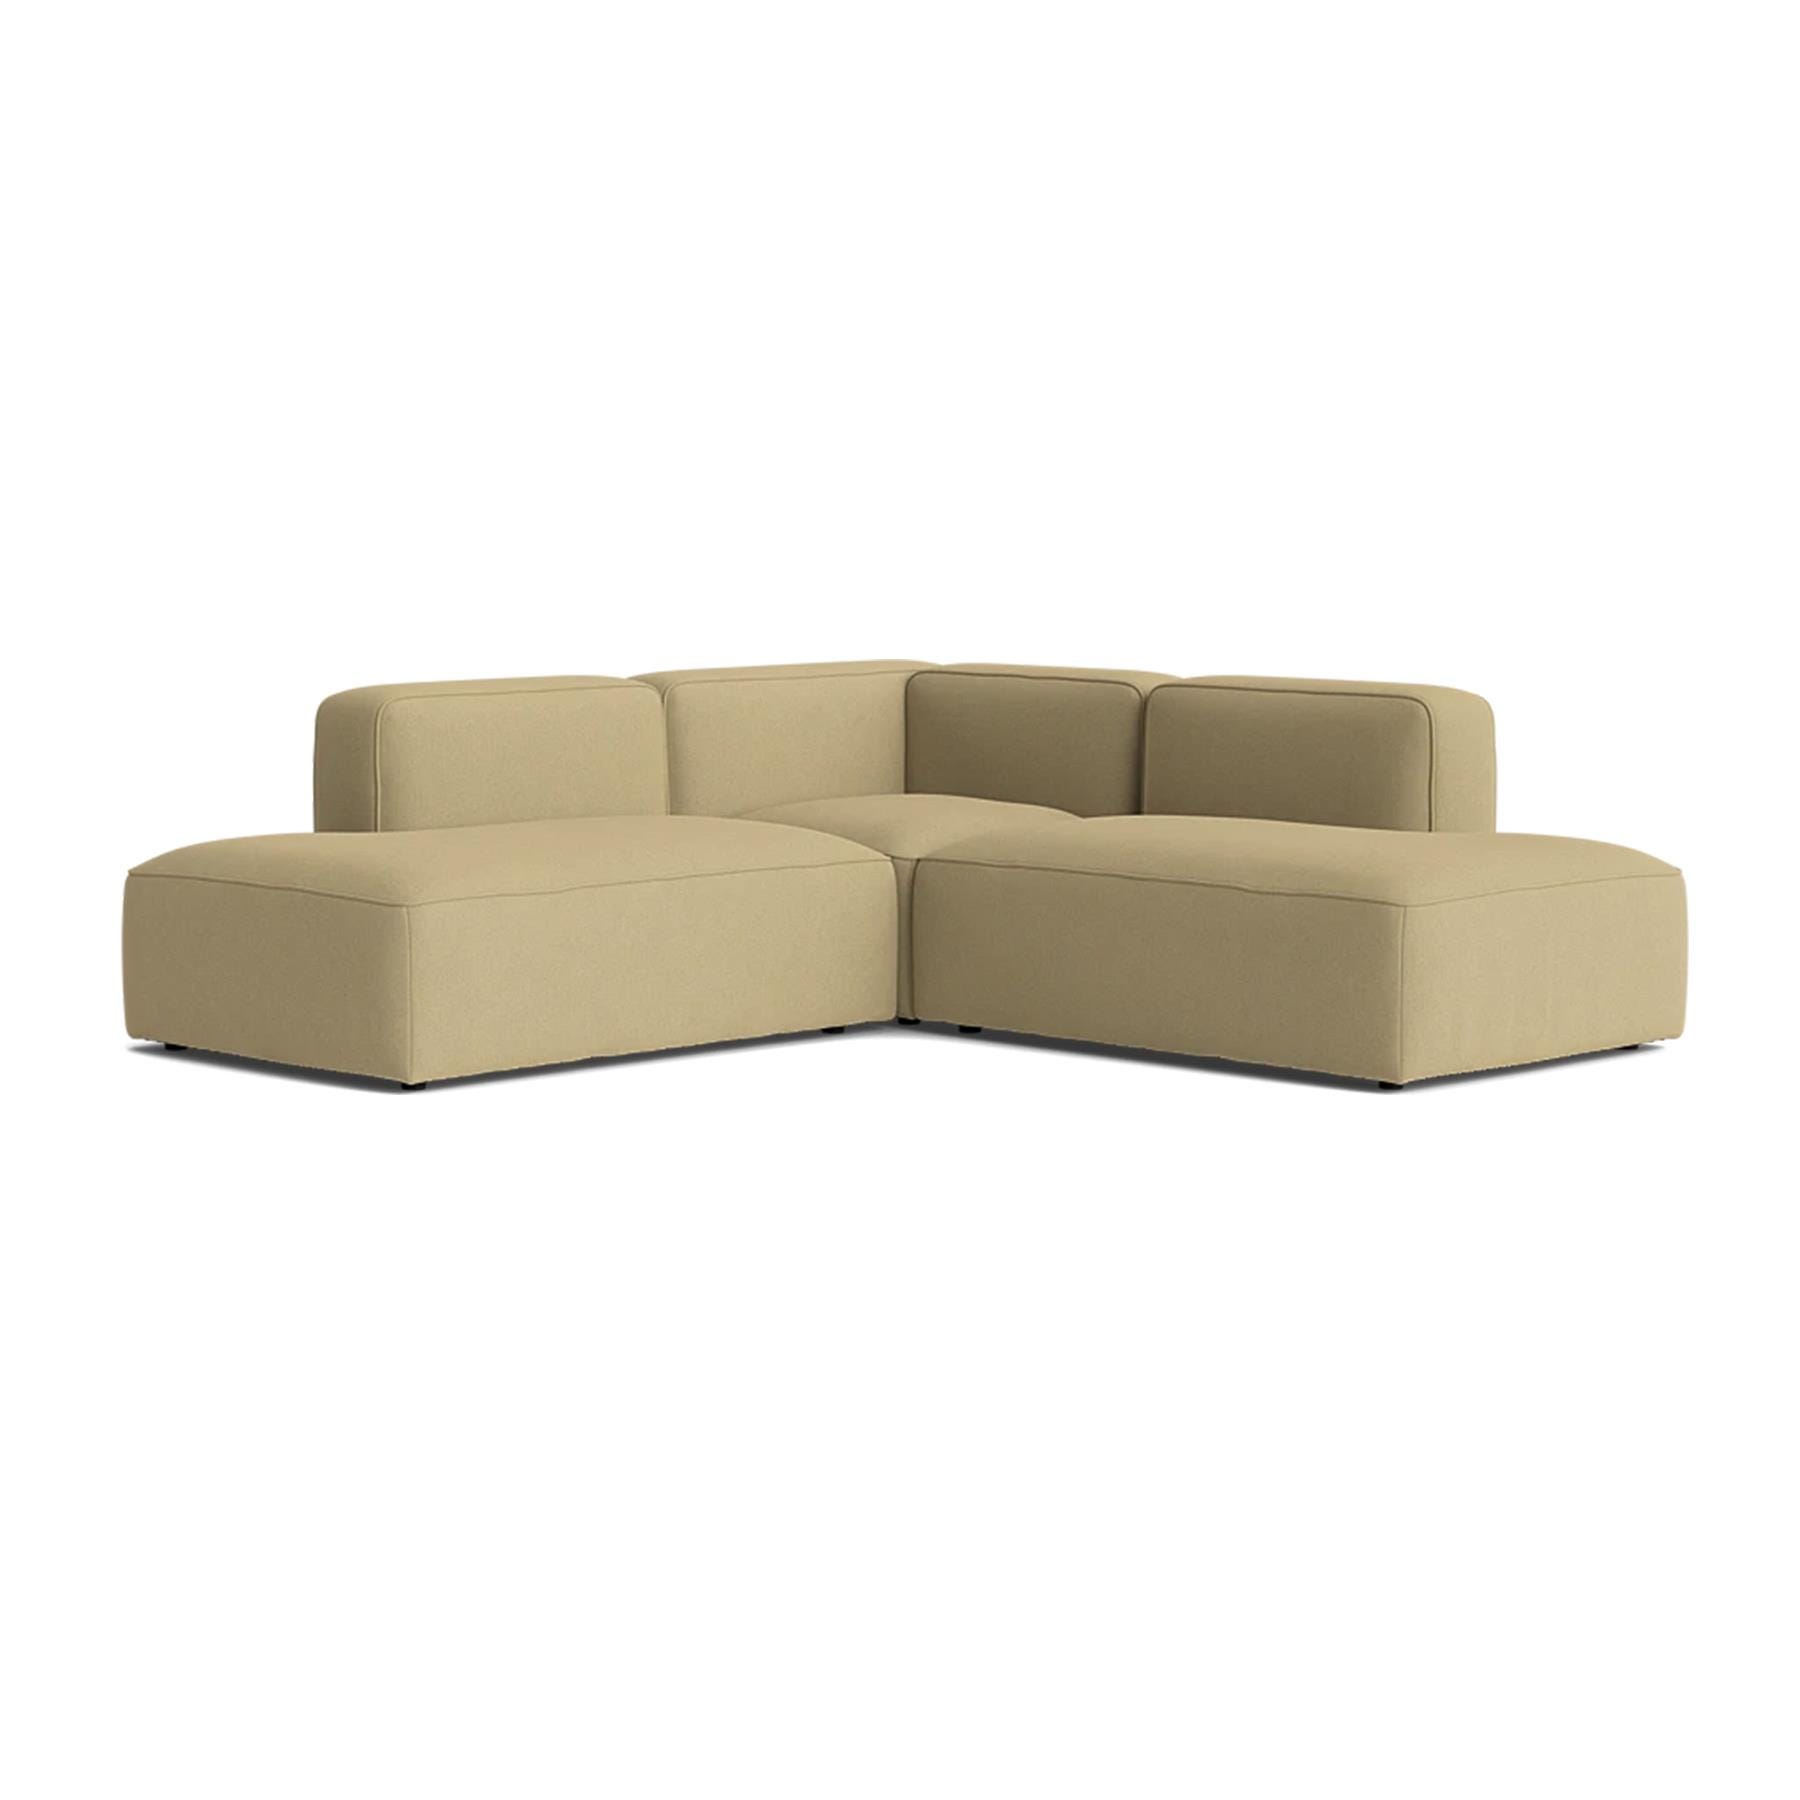 Make Nordic Basecamp Corner Sofa With Open Ends Fiord 422 Yellow Designer Furniture From Holloways Of Ludlow